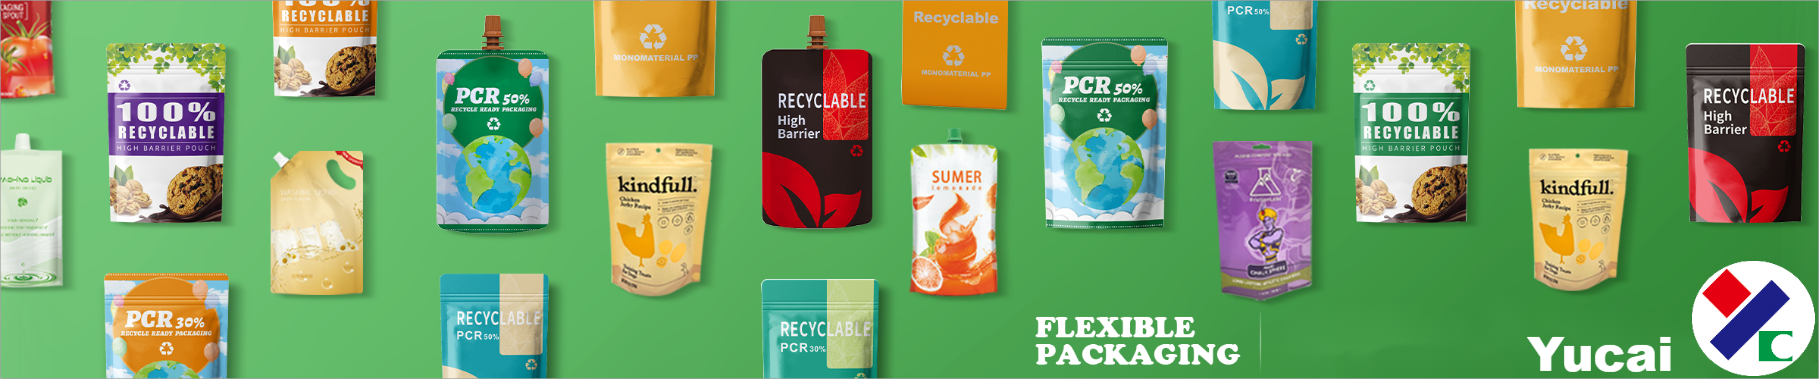 news-Recyclable Packaging-Yucai-img